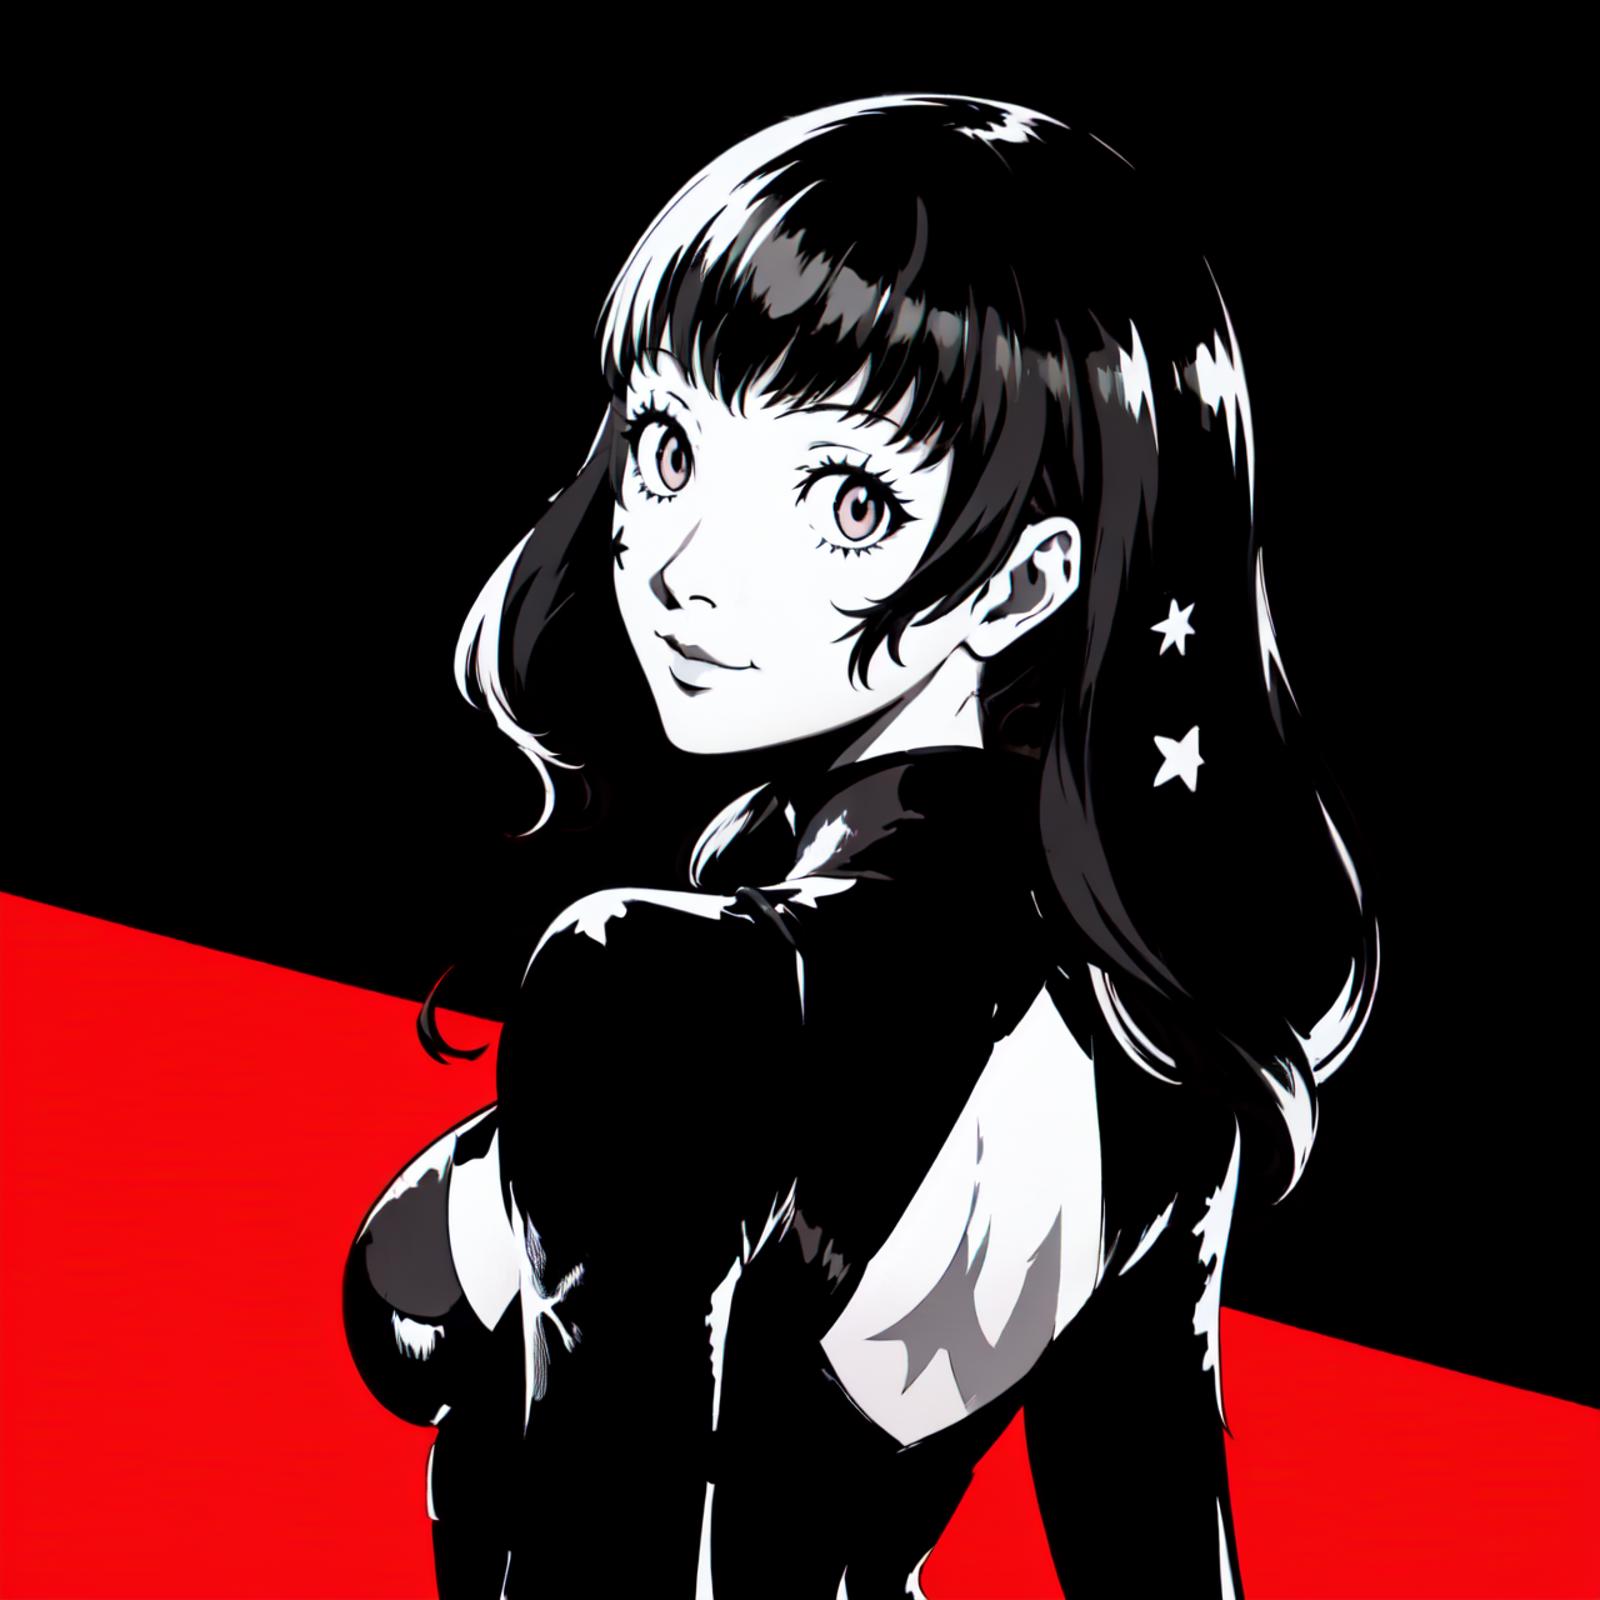 Persona5 style image by kaitos